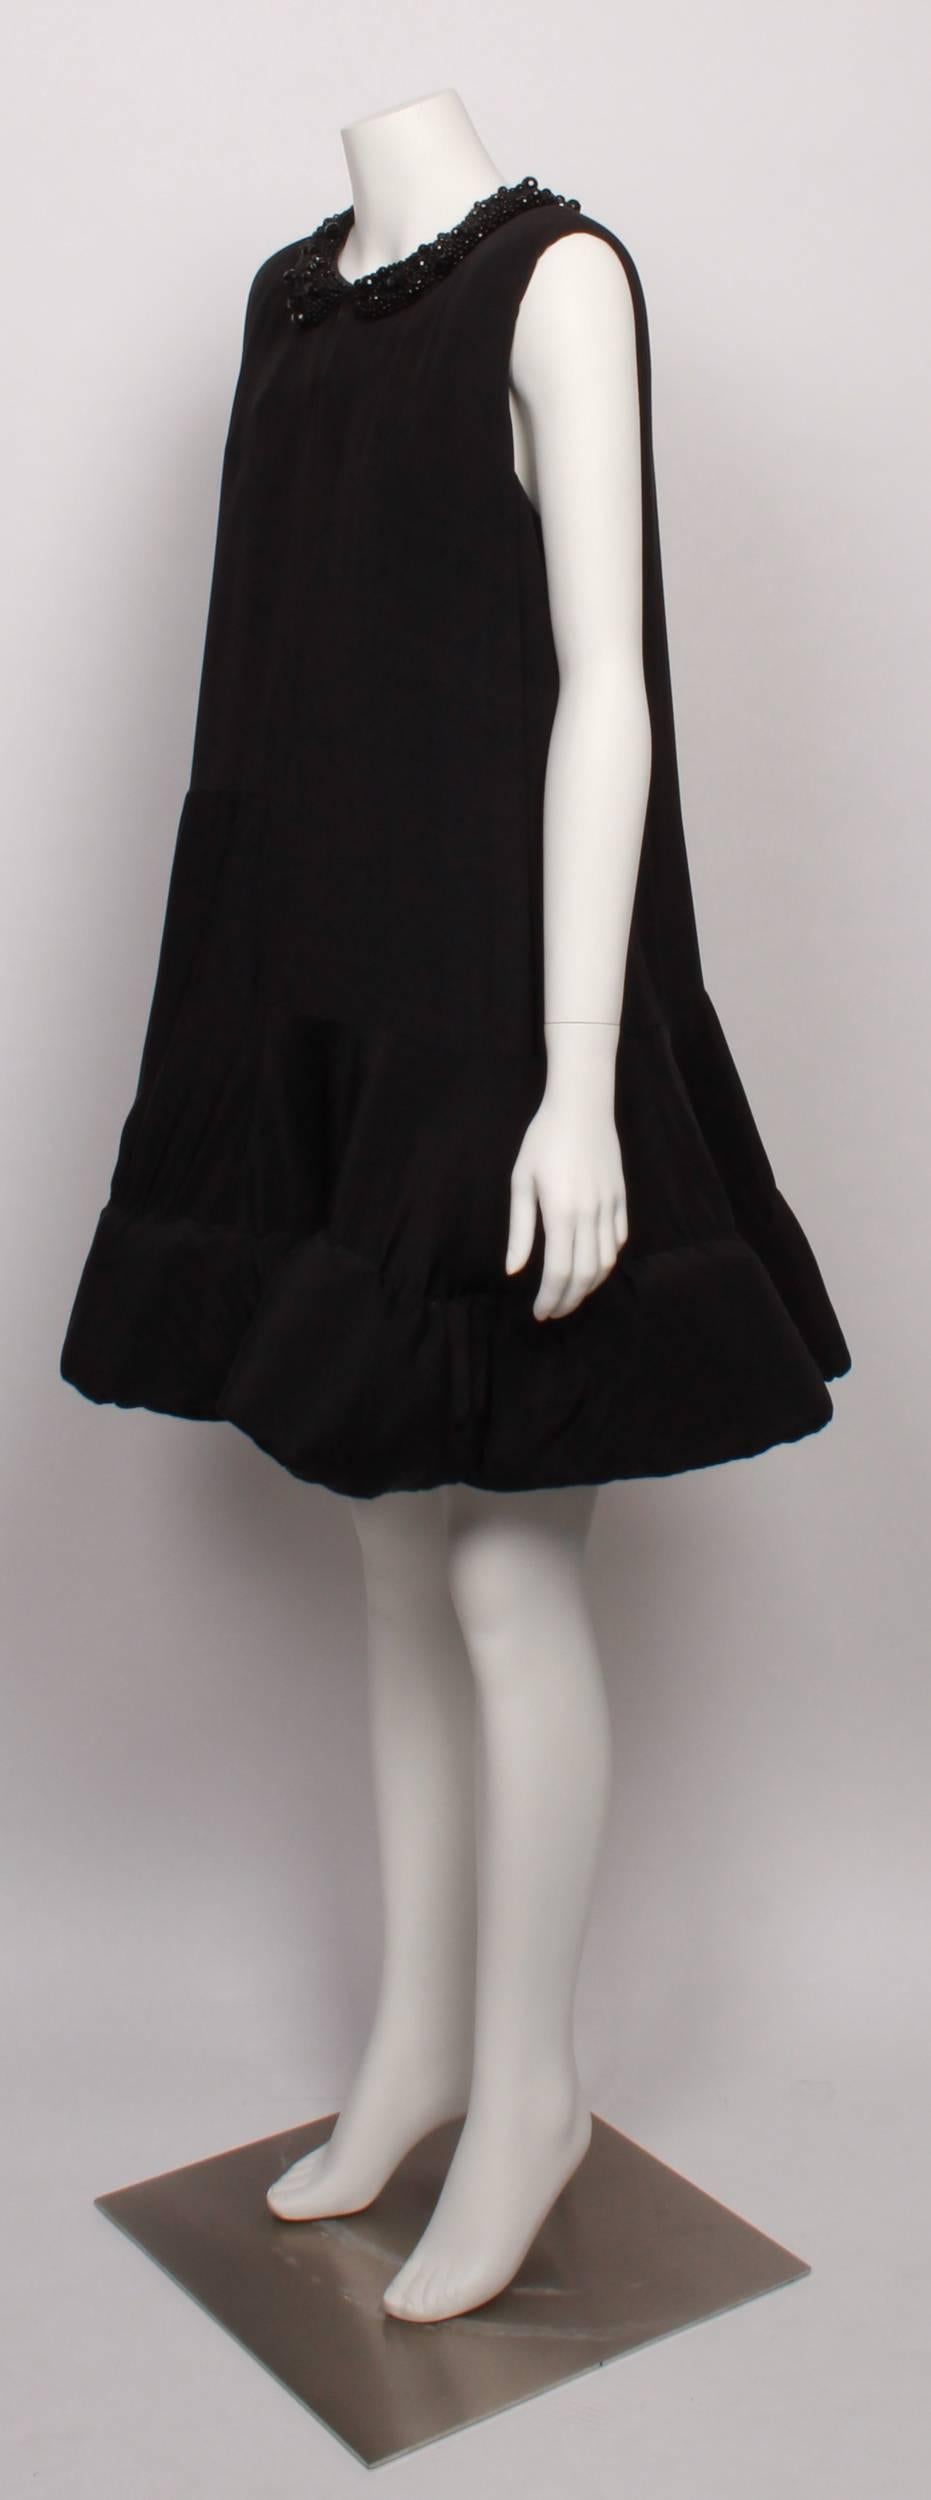 JOHN ROCHA A Frame black silk party dress with jett beaded peter pan collar and padded hemline to create a stand-alone floating affect. 
Dress features contemporary abstract square and rectangular silk panels, back keyhole opening with button